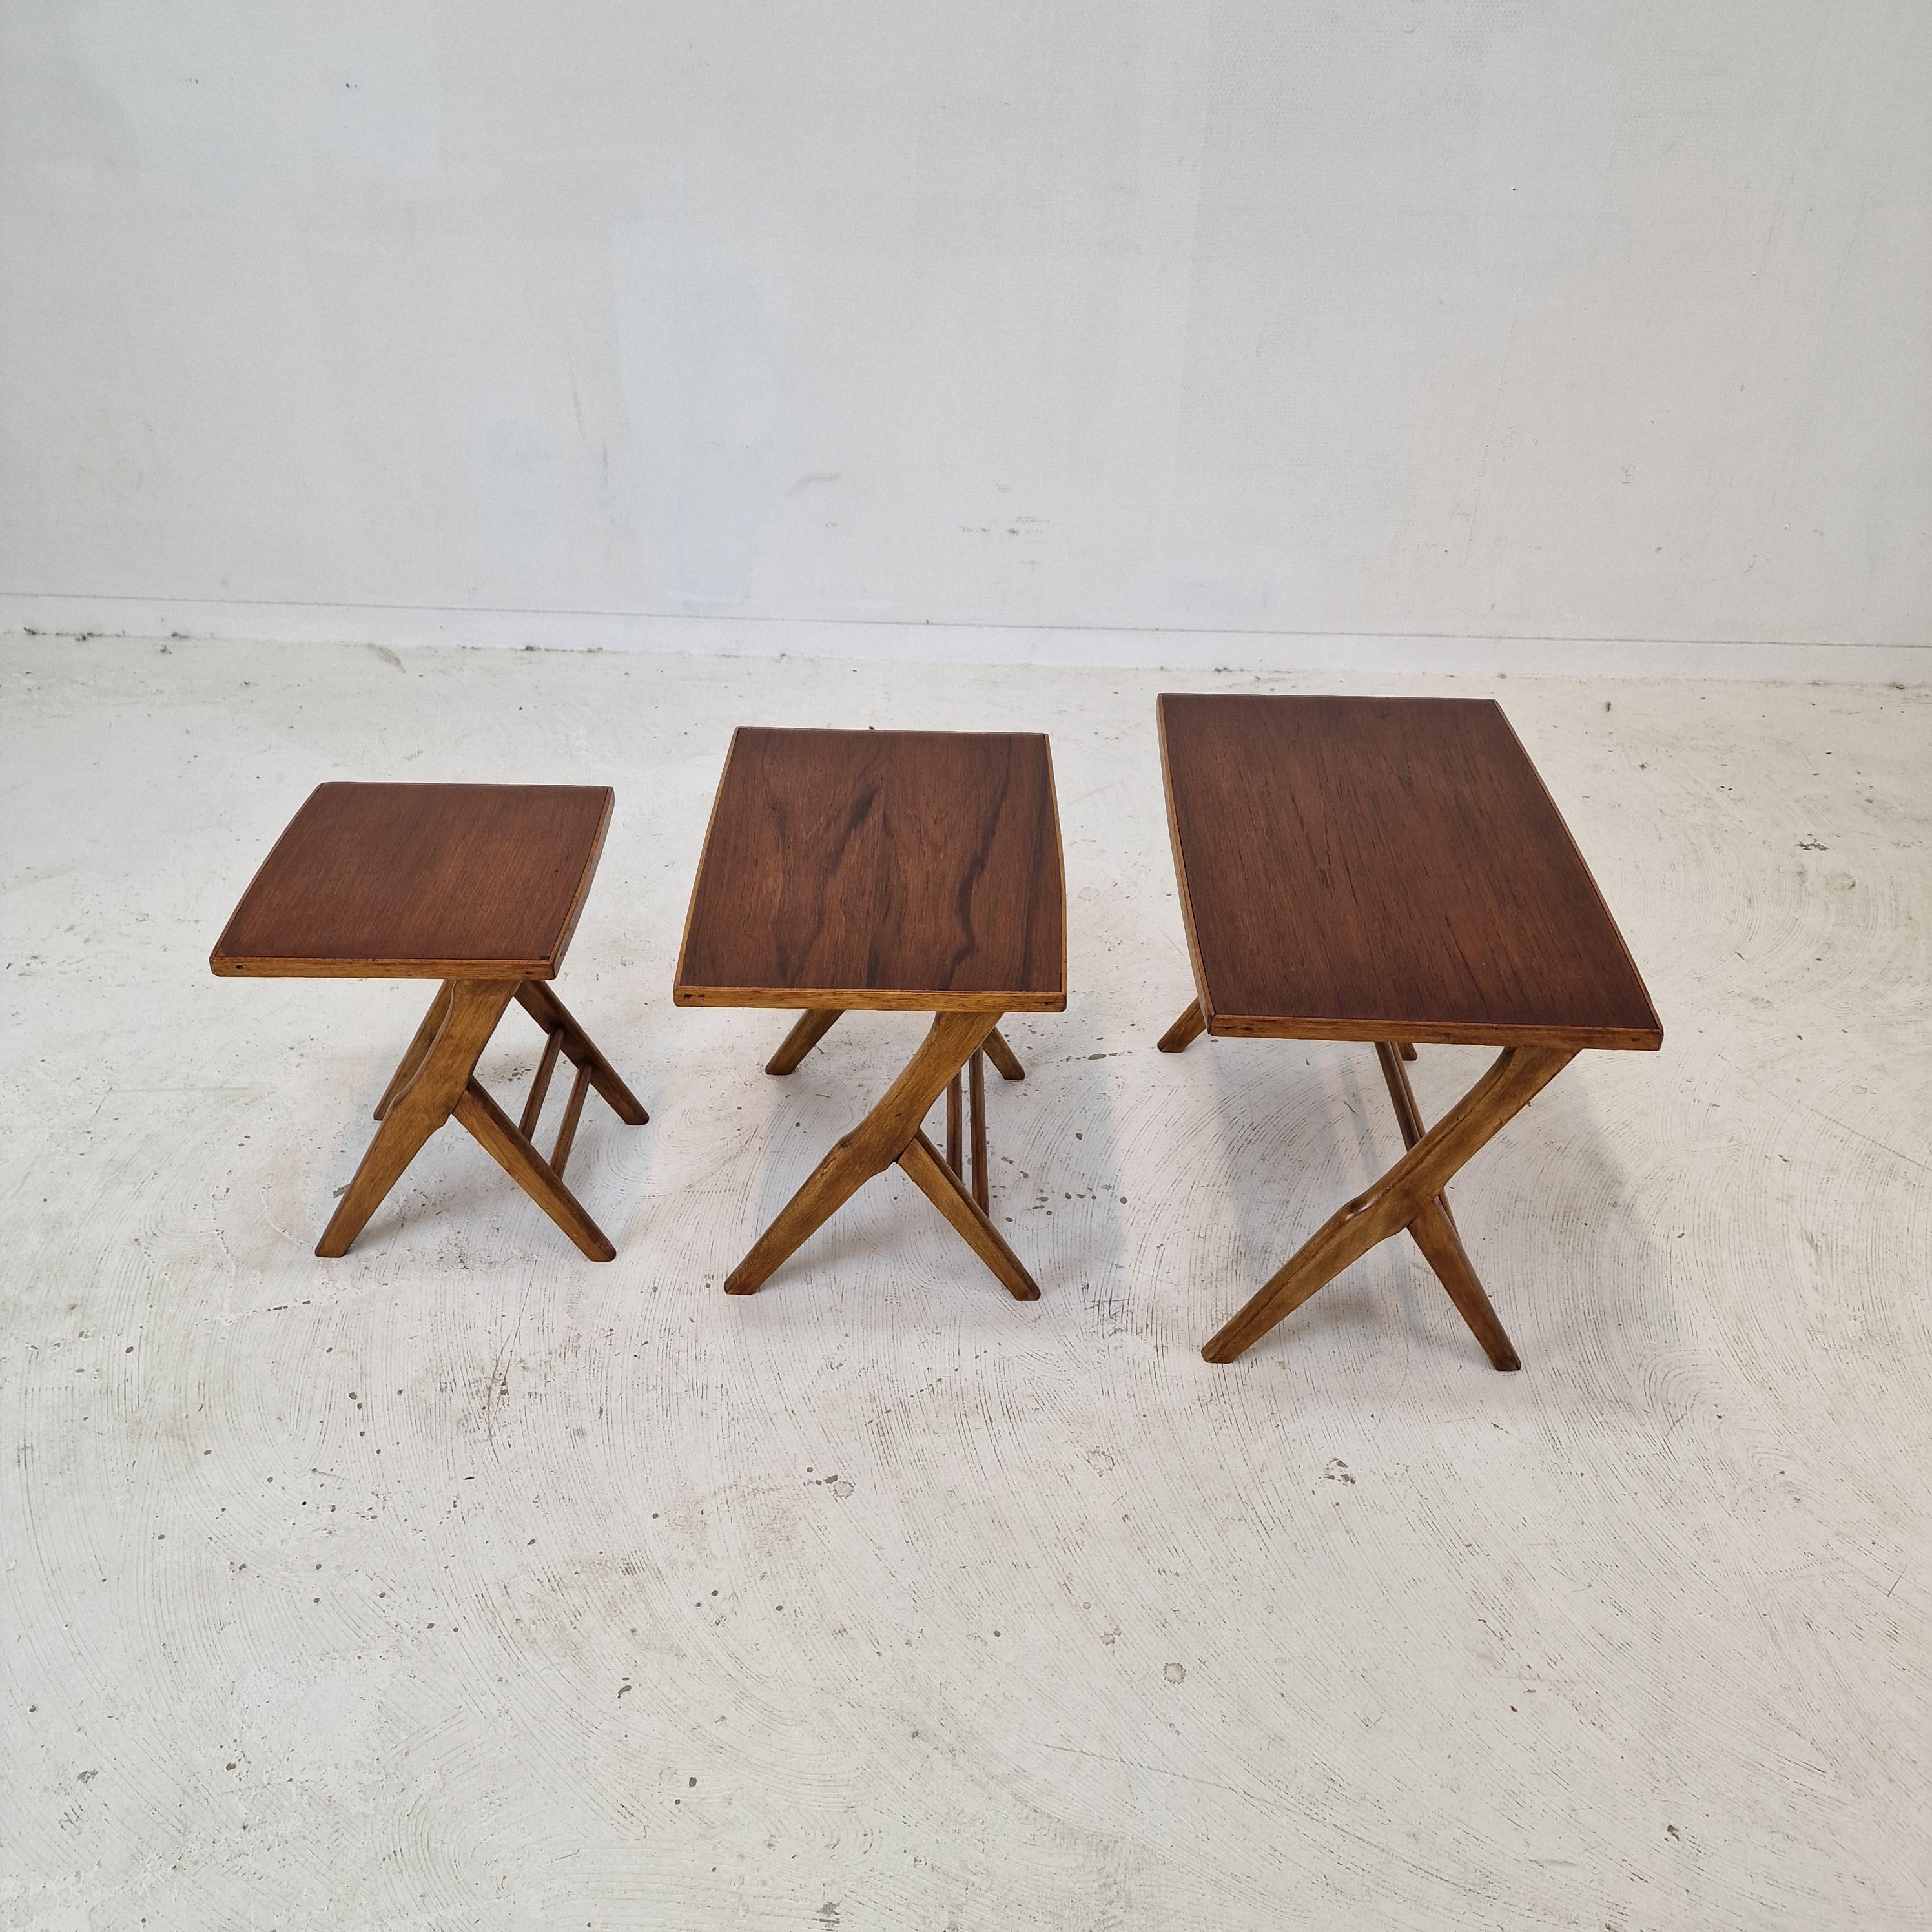 Mid-20th Century Set of 3 Wooden Nesting Tables, Holland 1960s For Sale